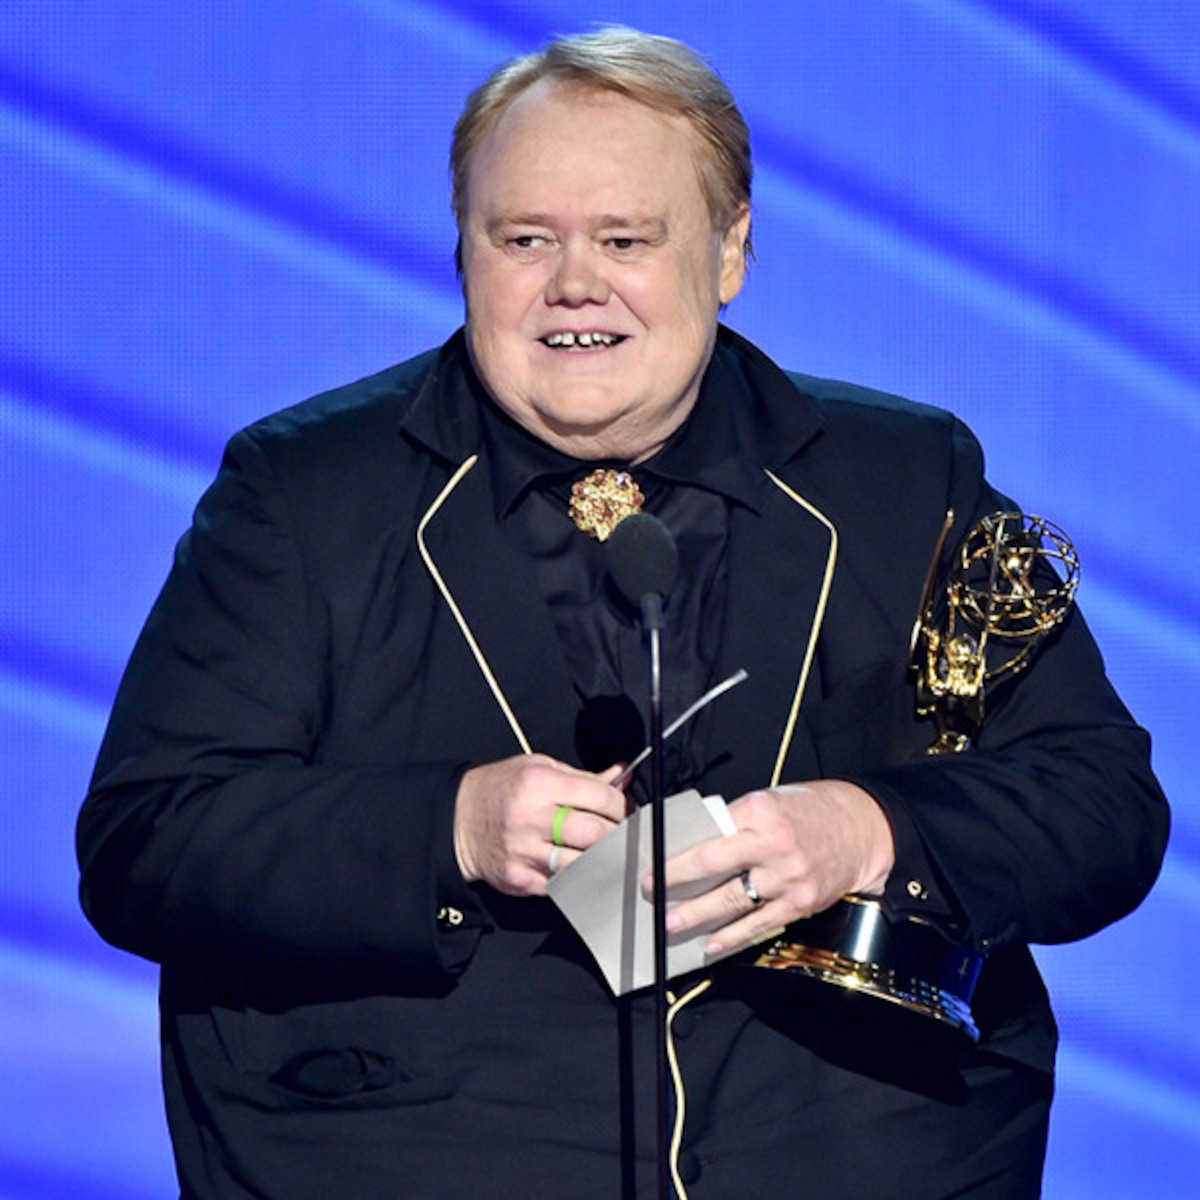 Coming 2 America Actor Louie Anderson Diagnosed With Cancer - E! Online